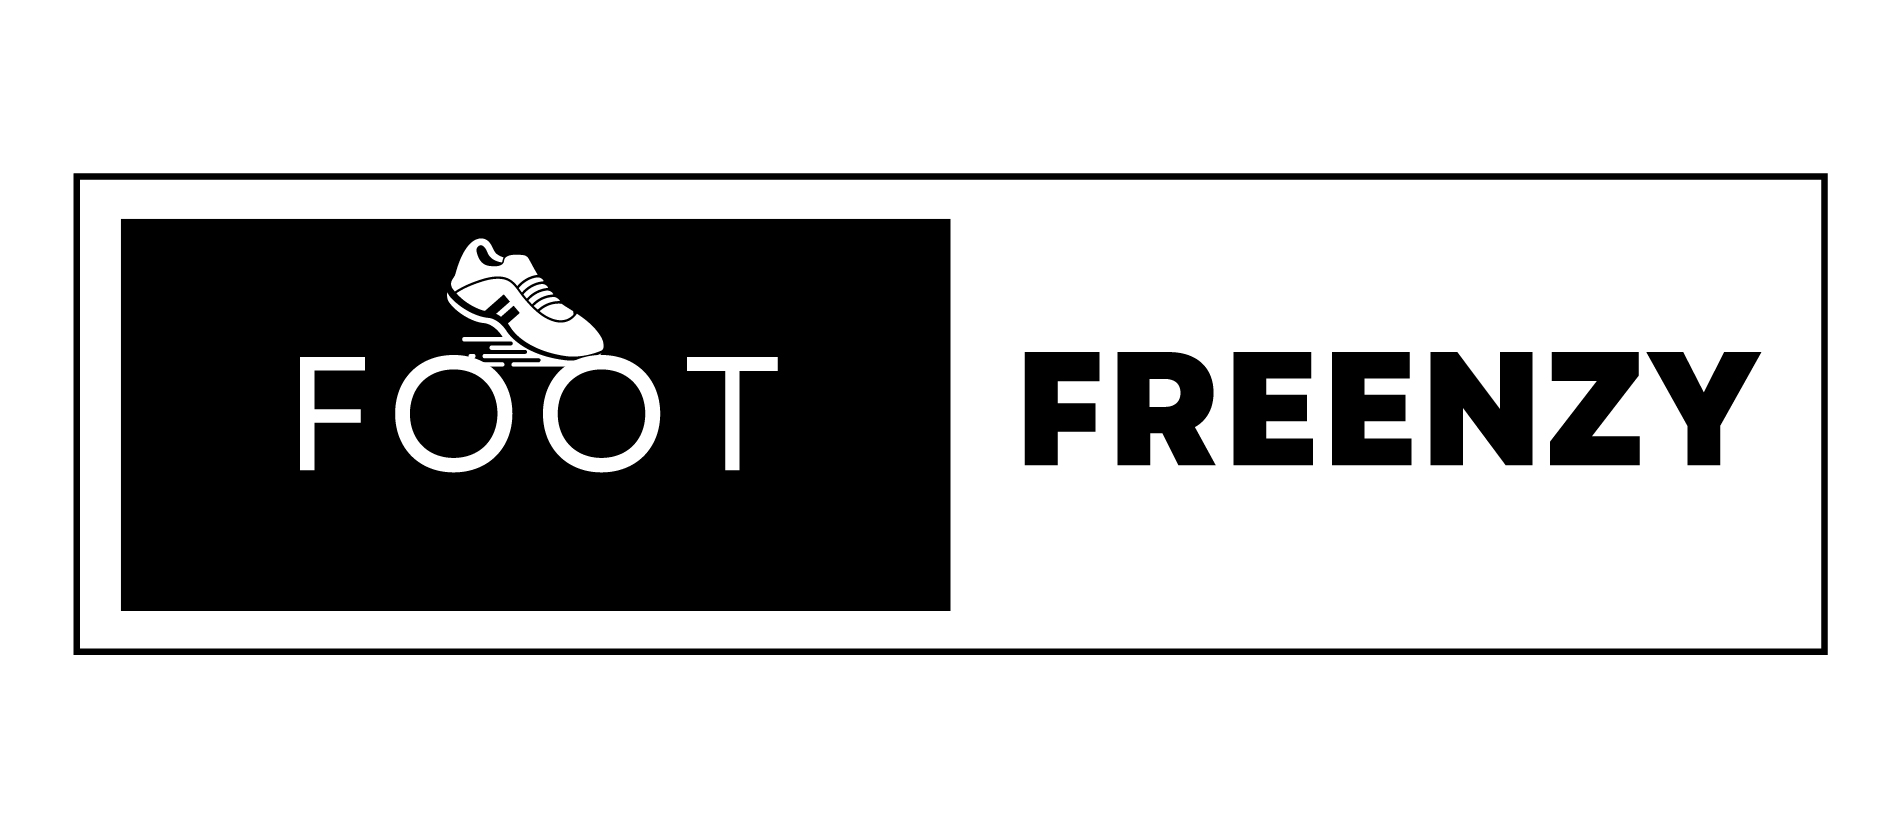 Foot Freenzy